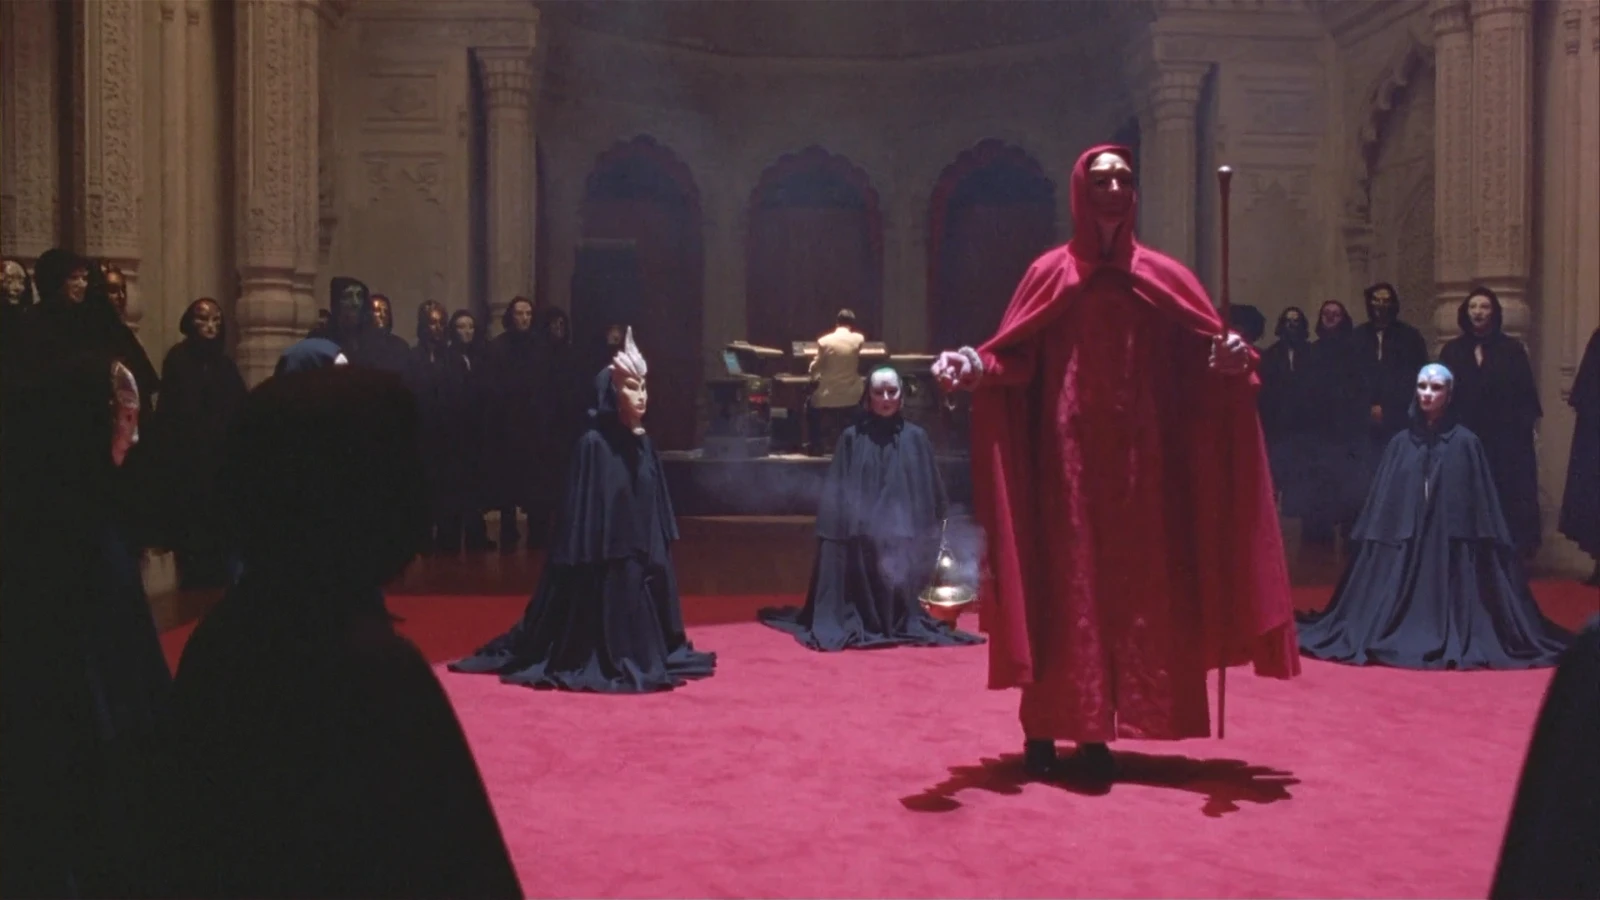 The famous secret society orgy sequence in Stanley Kubrick's Eyes Wide Shut